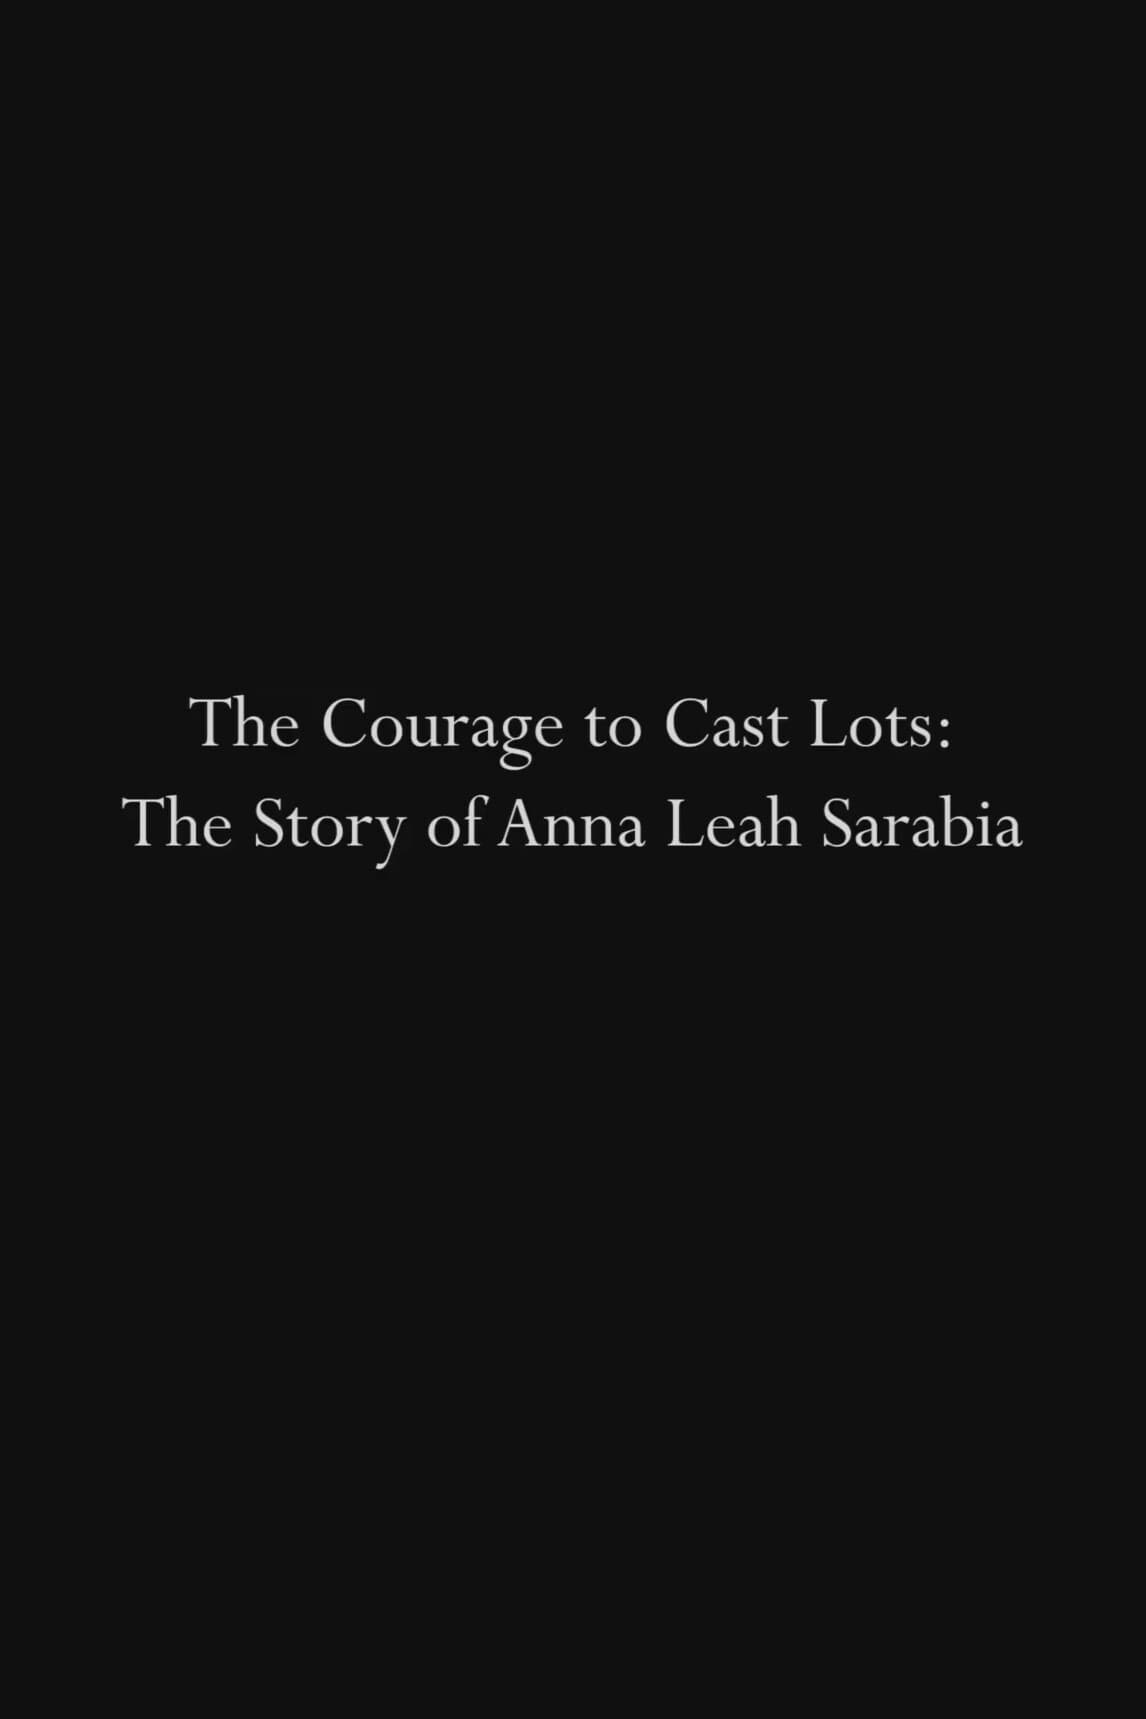 The Courage to Cast Lots: The Story of Anna Leah Sarabia